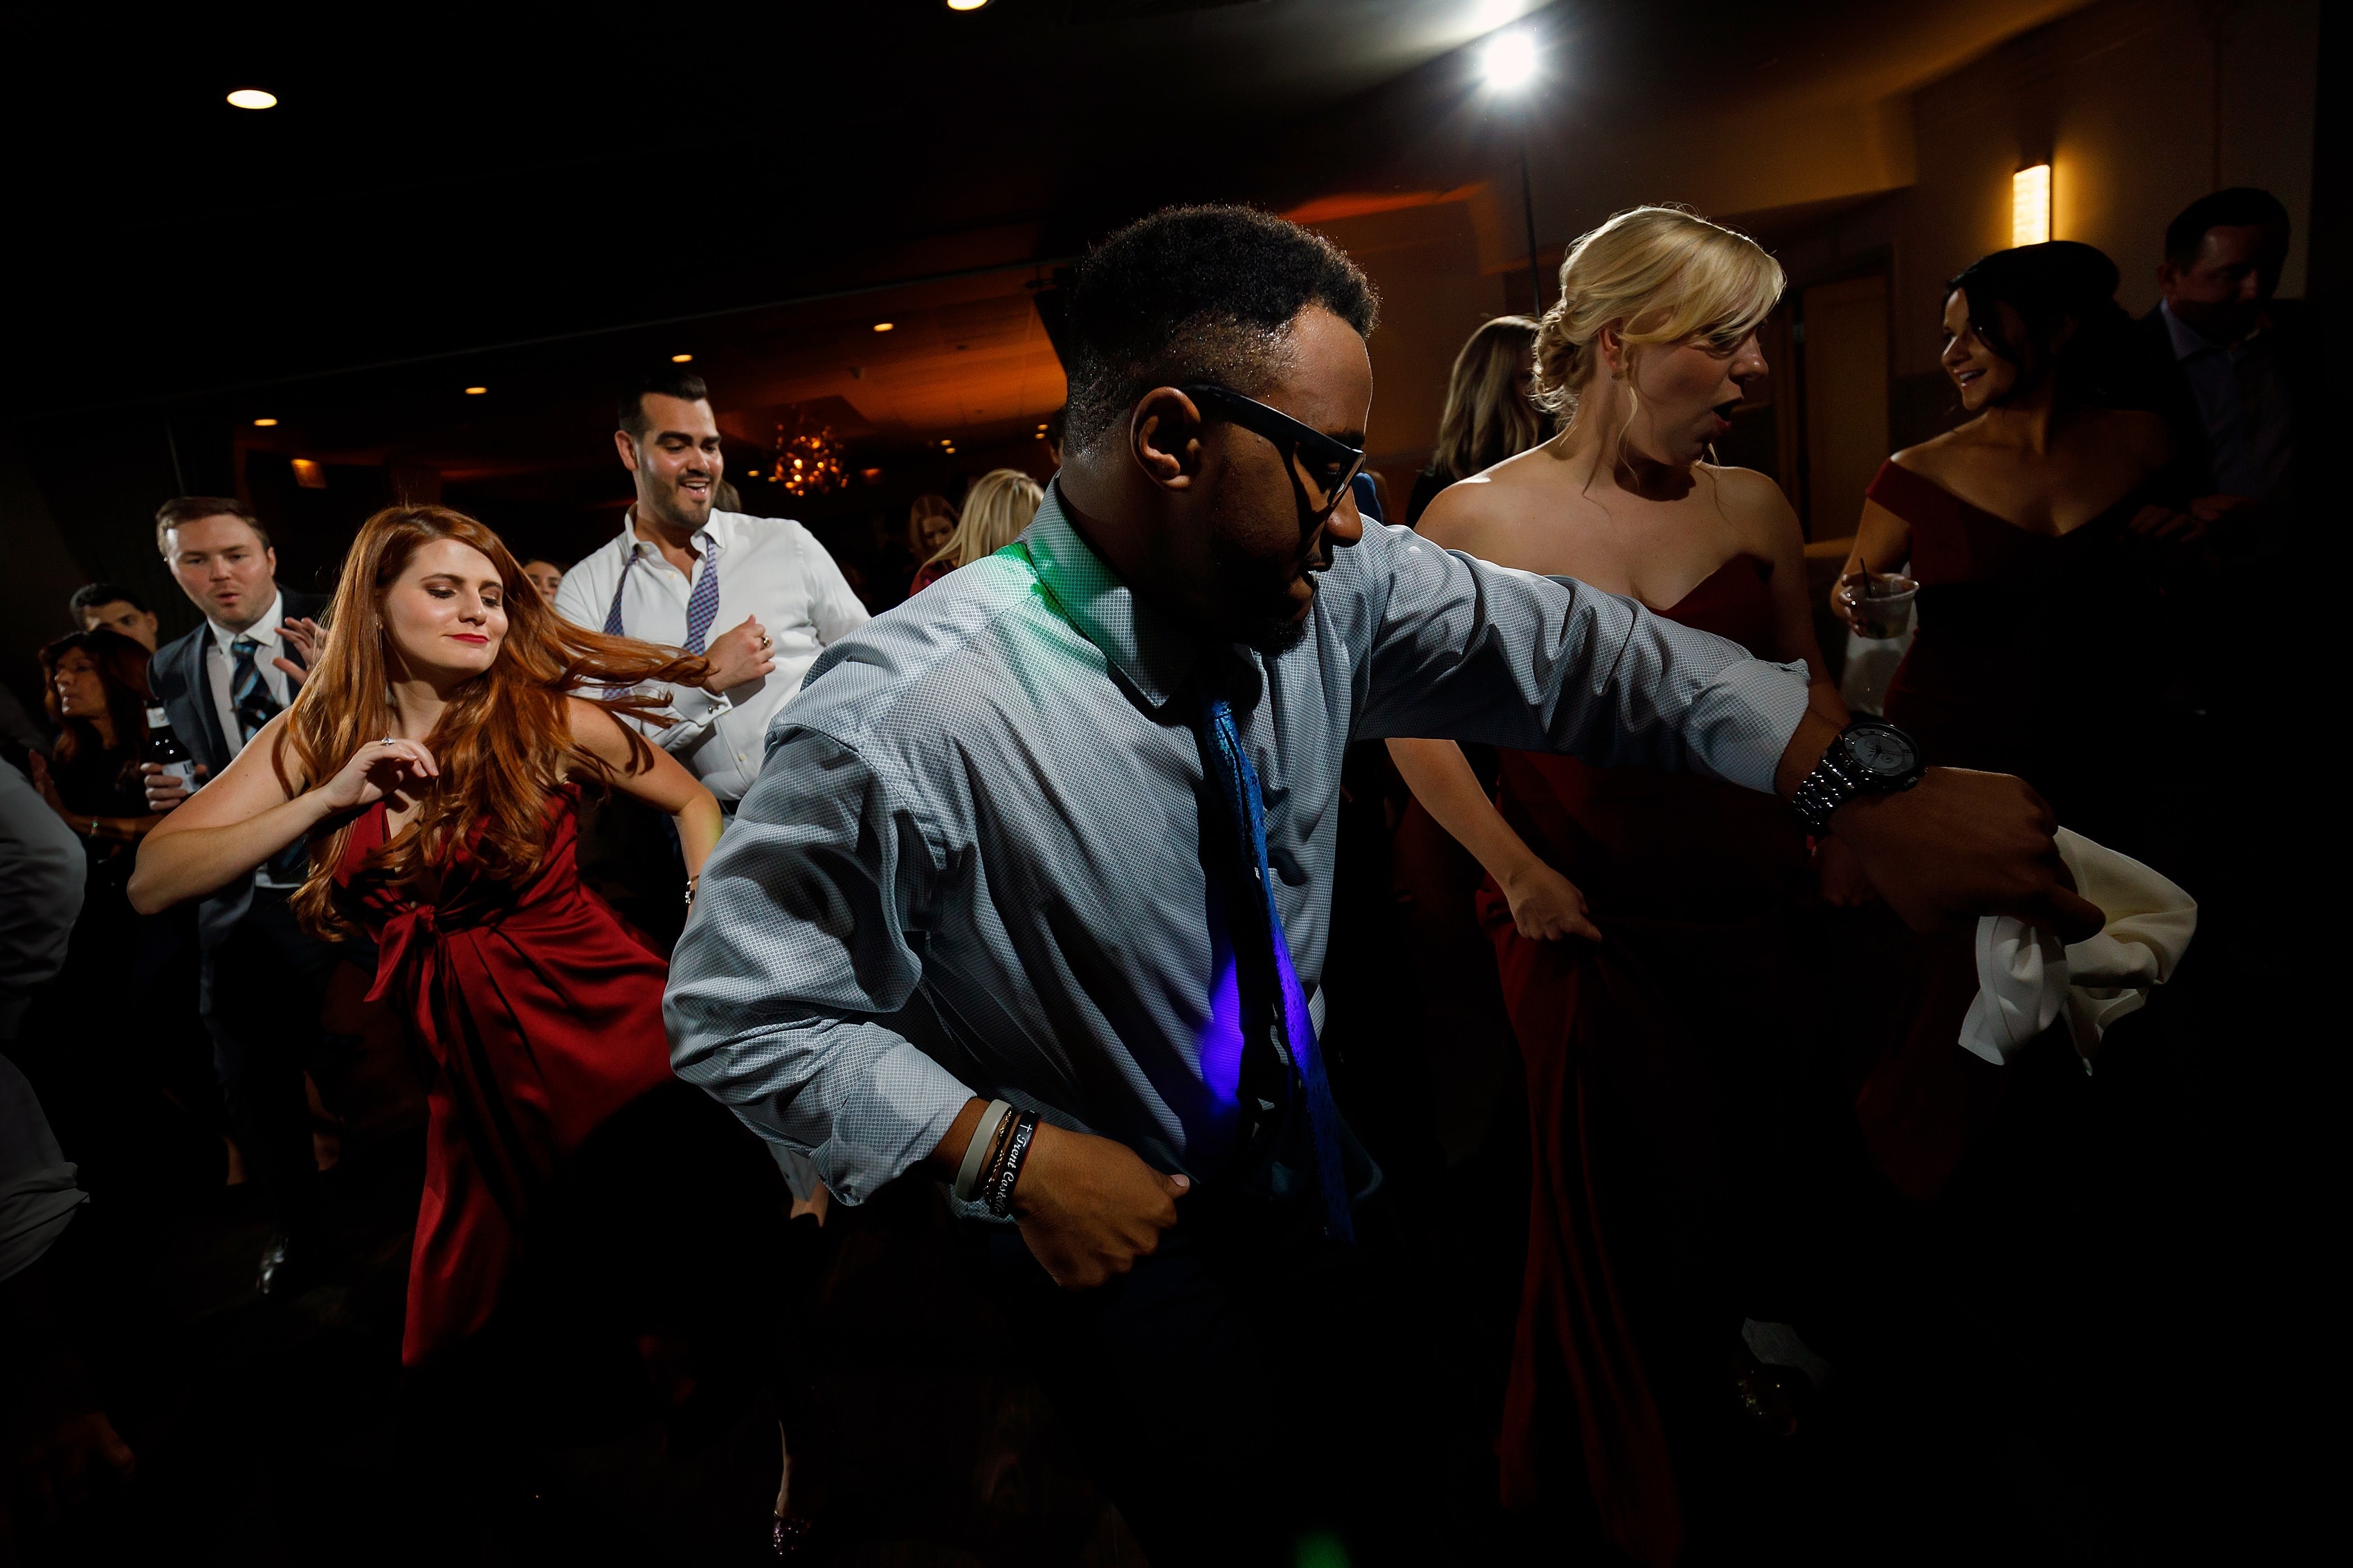 wedding guests dance during wedding reception at Pazzo's at Three-Eleven in downtown Chicago